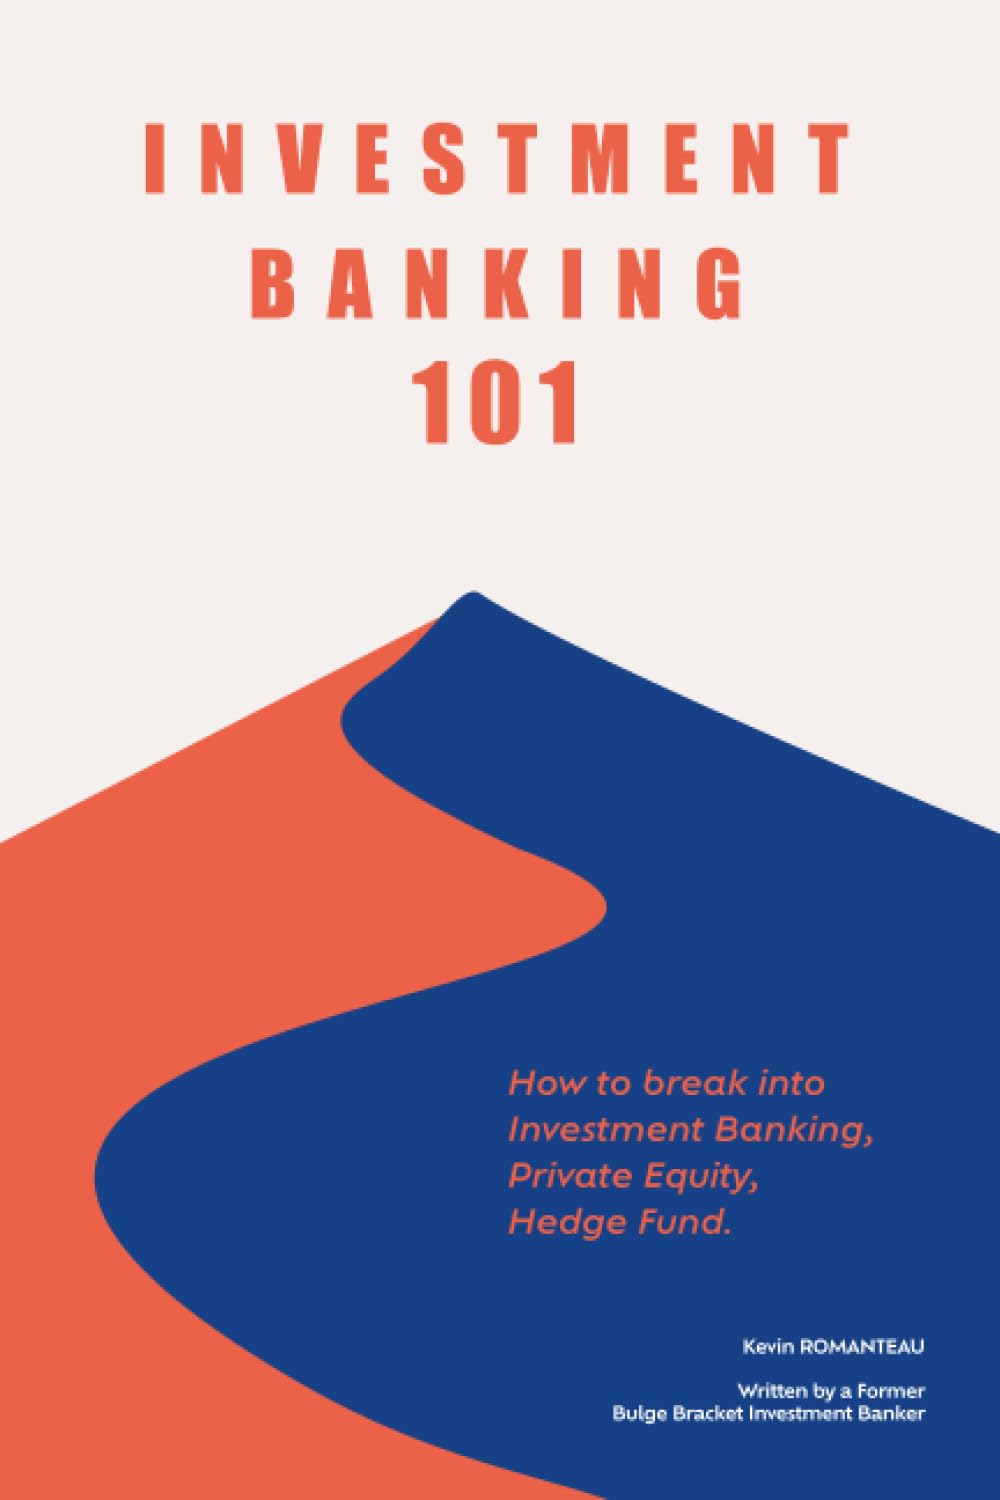 Investment Banking 101: How to Break Into IB, PE, HF